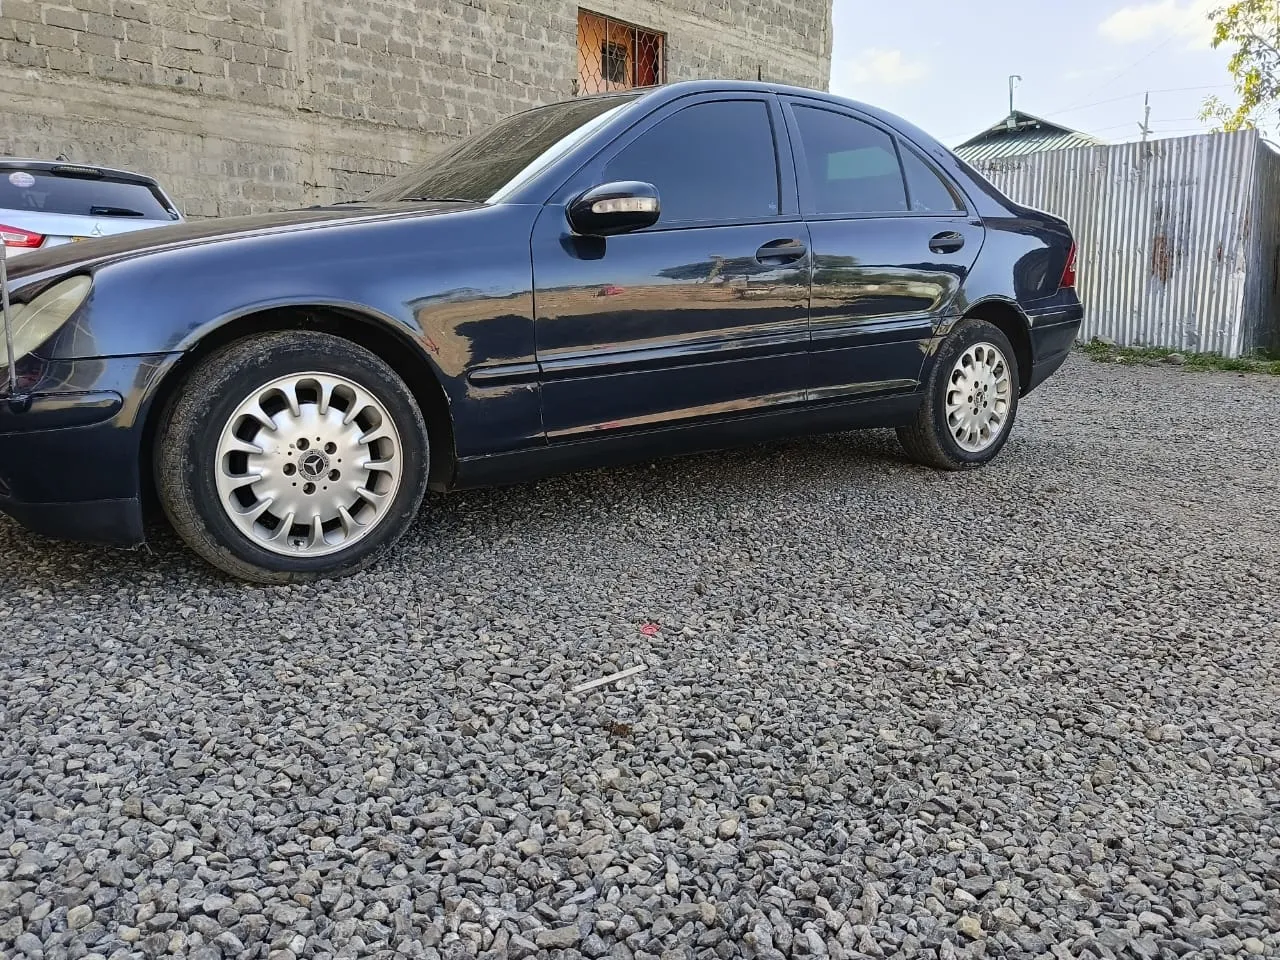 Mercedes Benz C180 🔥 🔥 🔥 You Pay 30% DEPOSIT Trade in OK EXCLUSIVE hire purchase installments